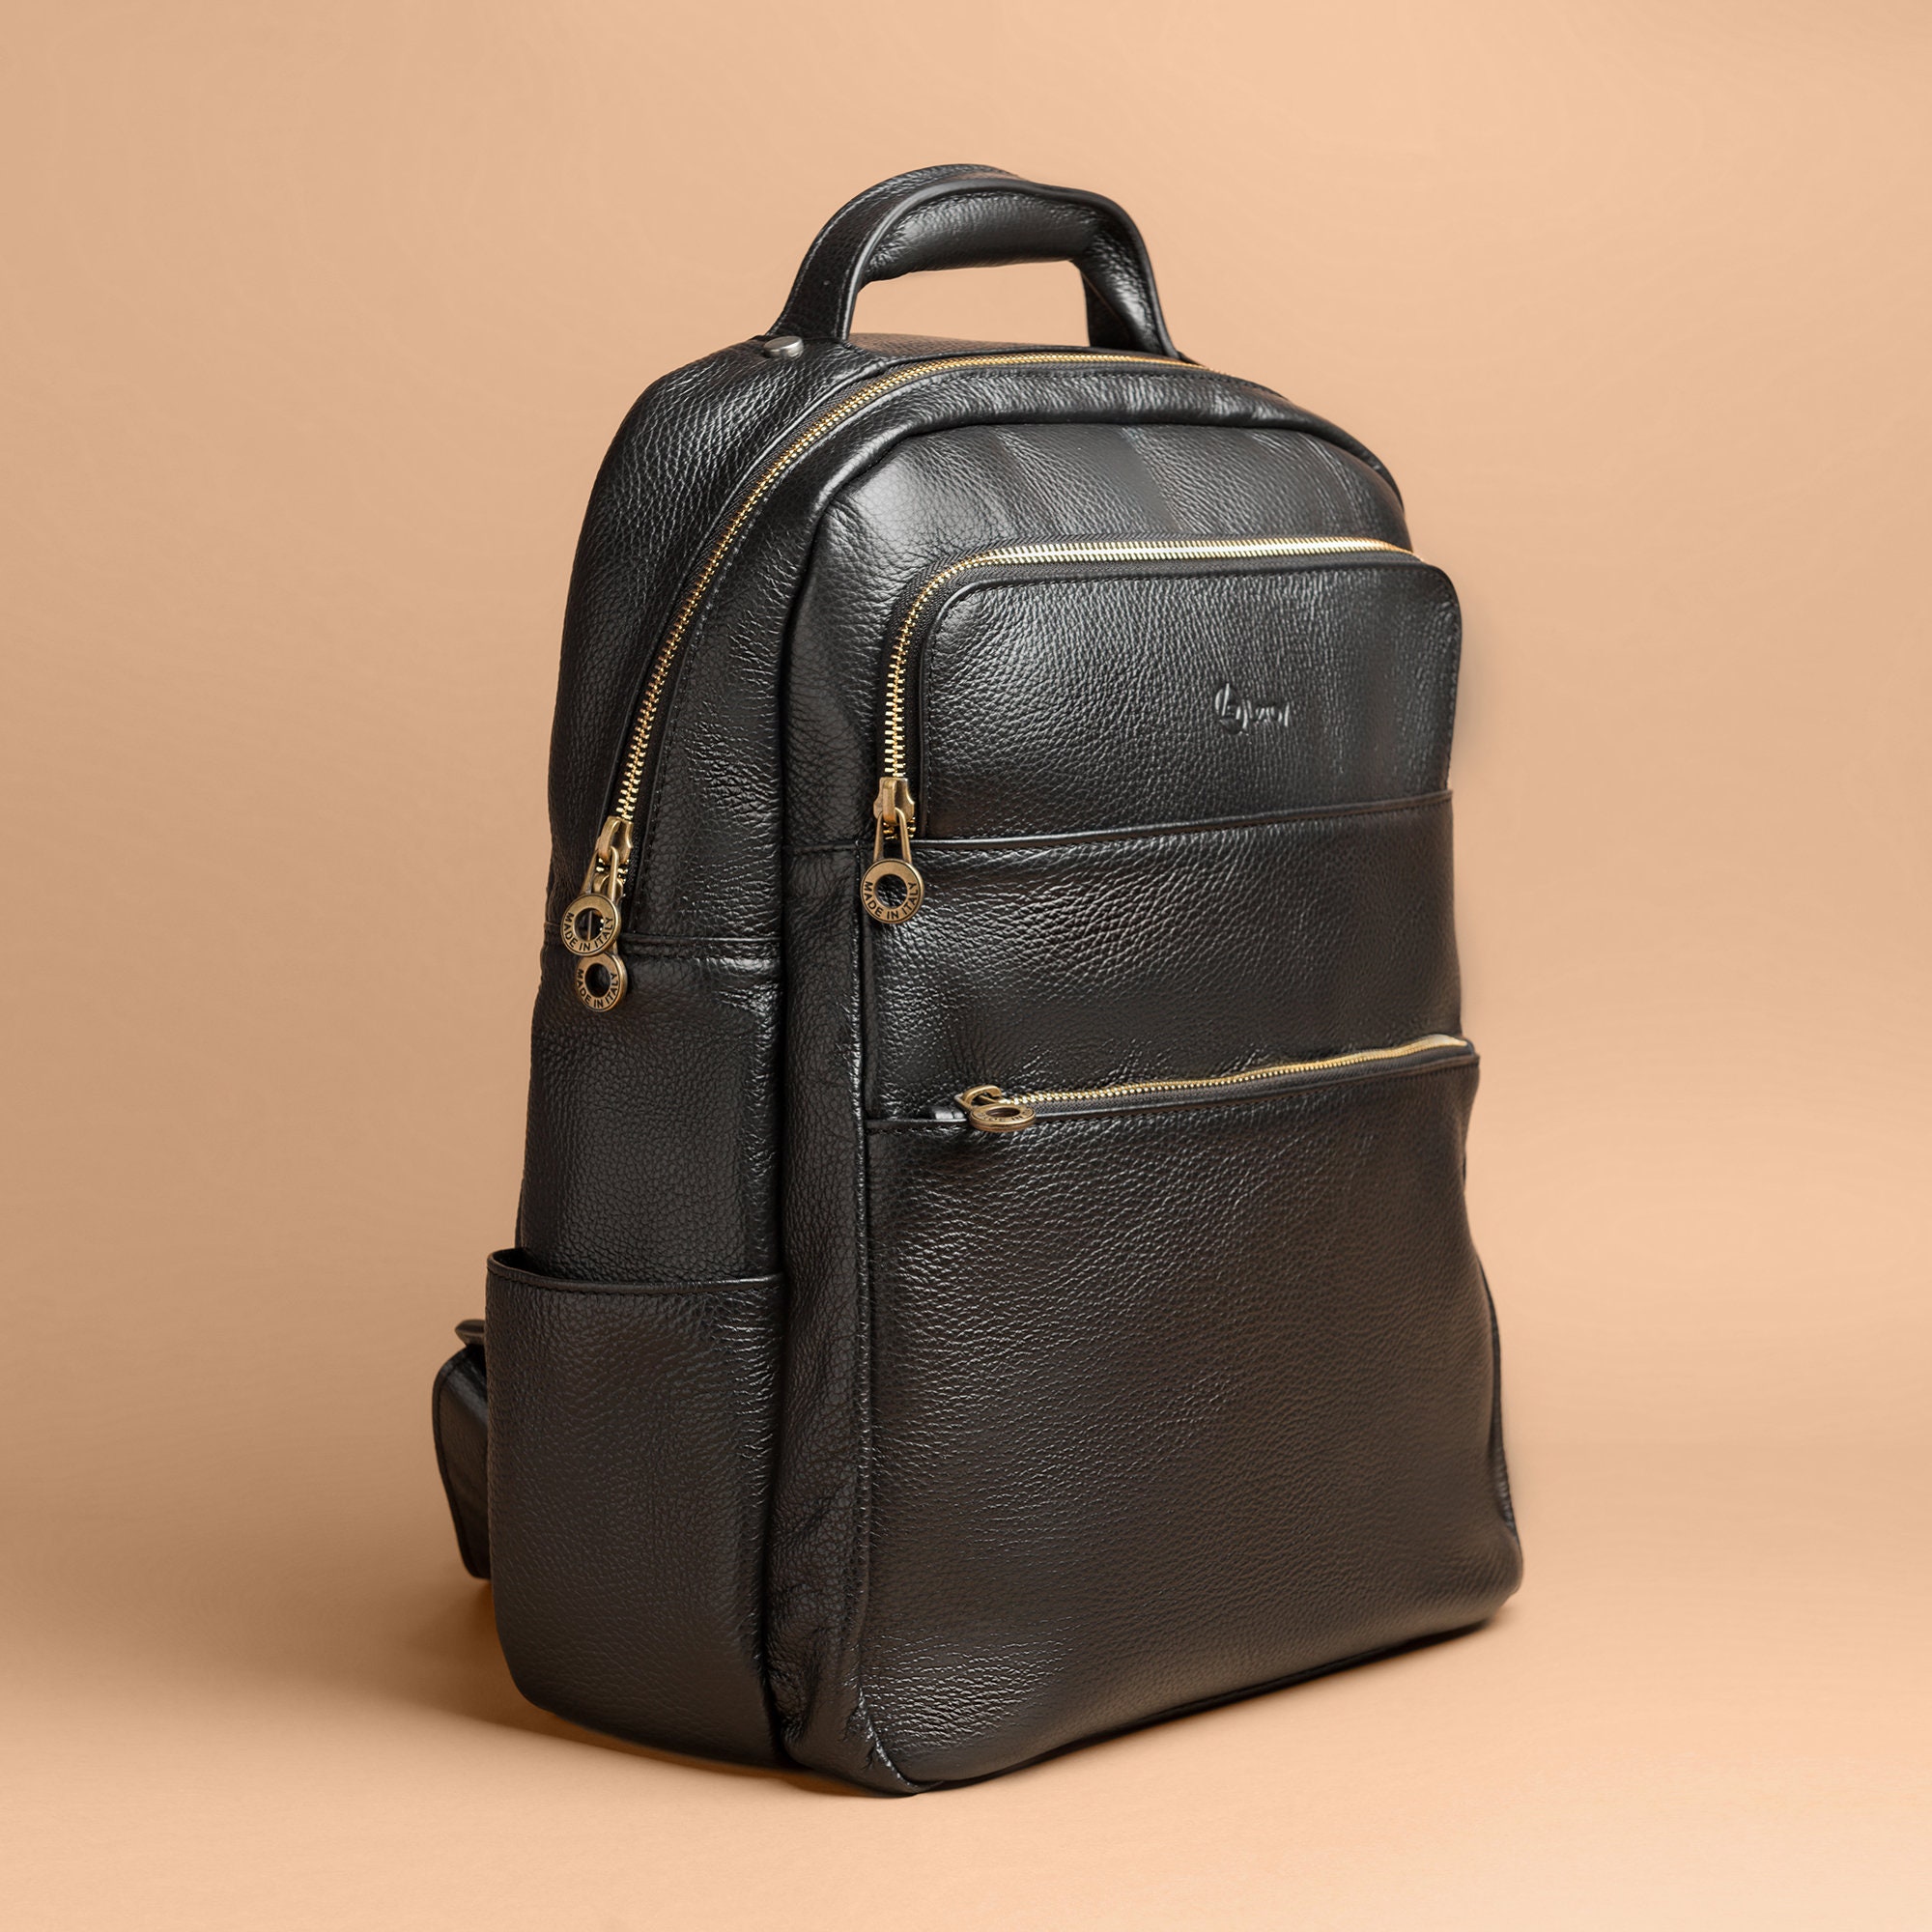 Black Monogram Leather Luxury Carry-On Backpack (Patented Signature Design)